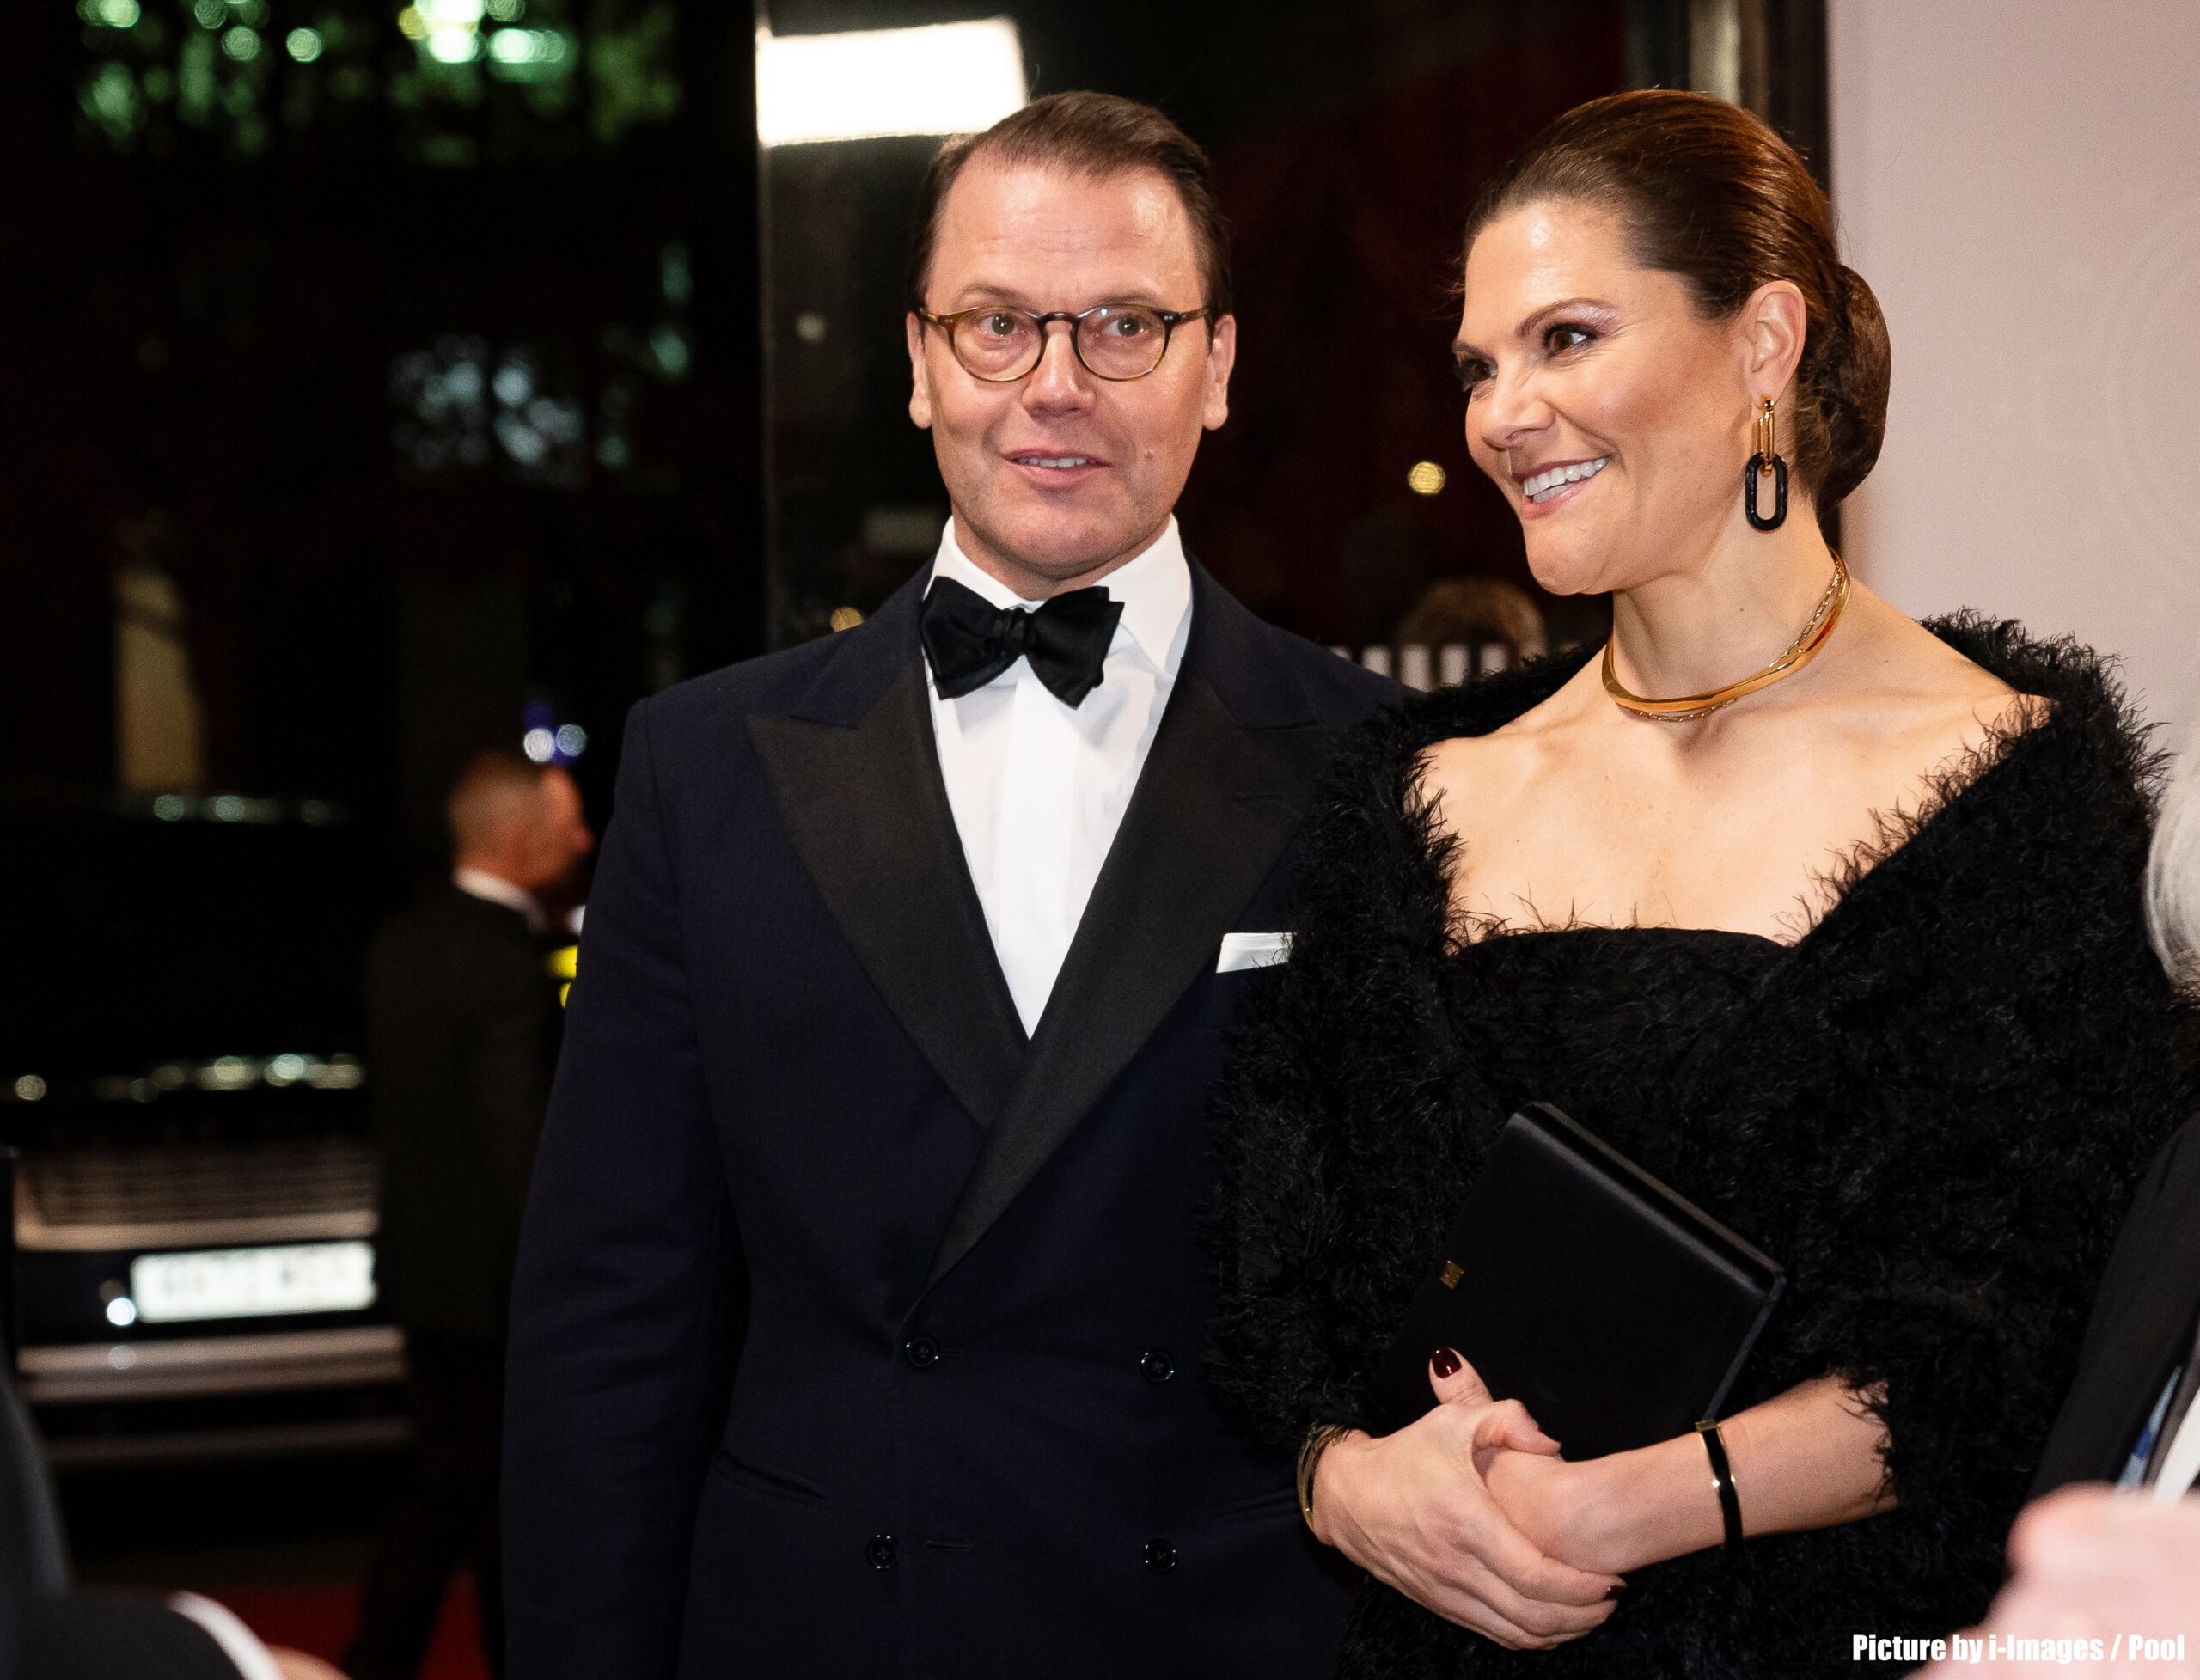 Overshadowed by controversy – Crown Princess Victoria and Prince Daniel make an important trip to the UK